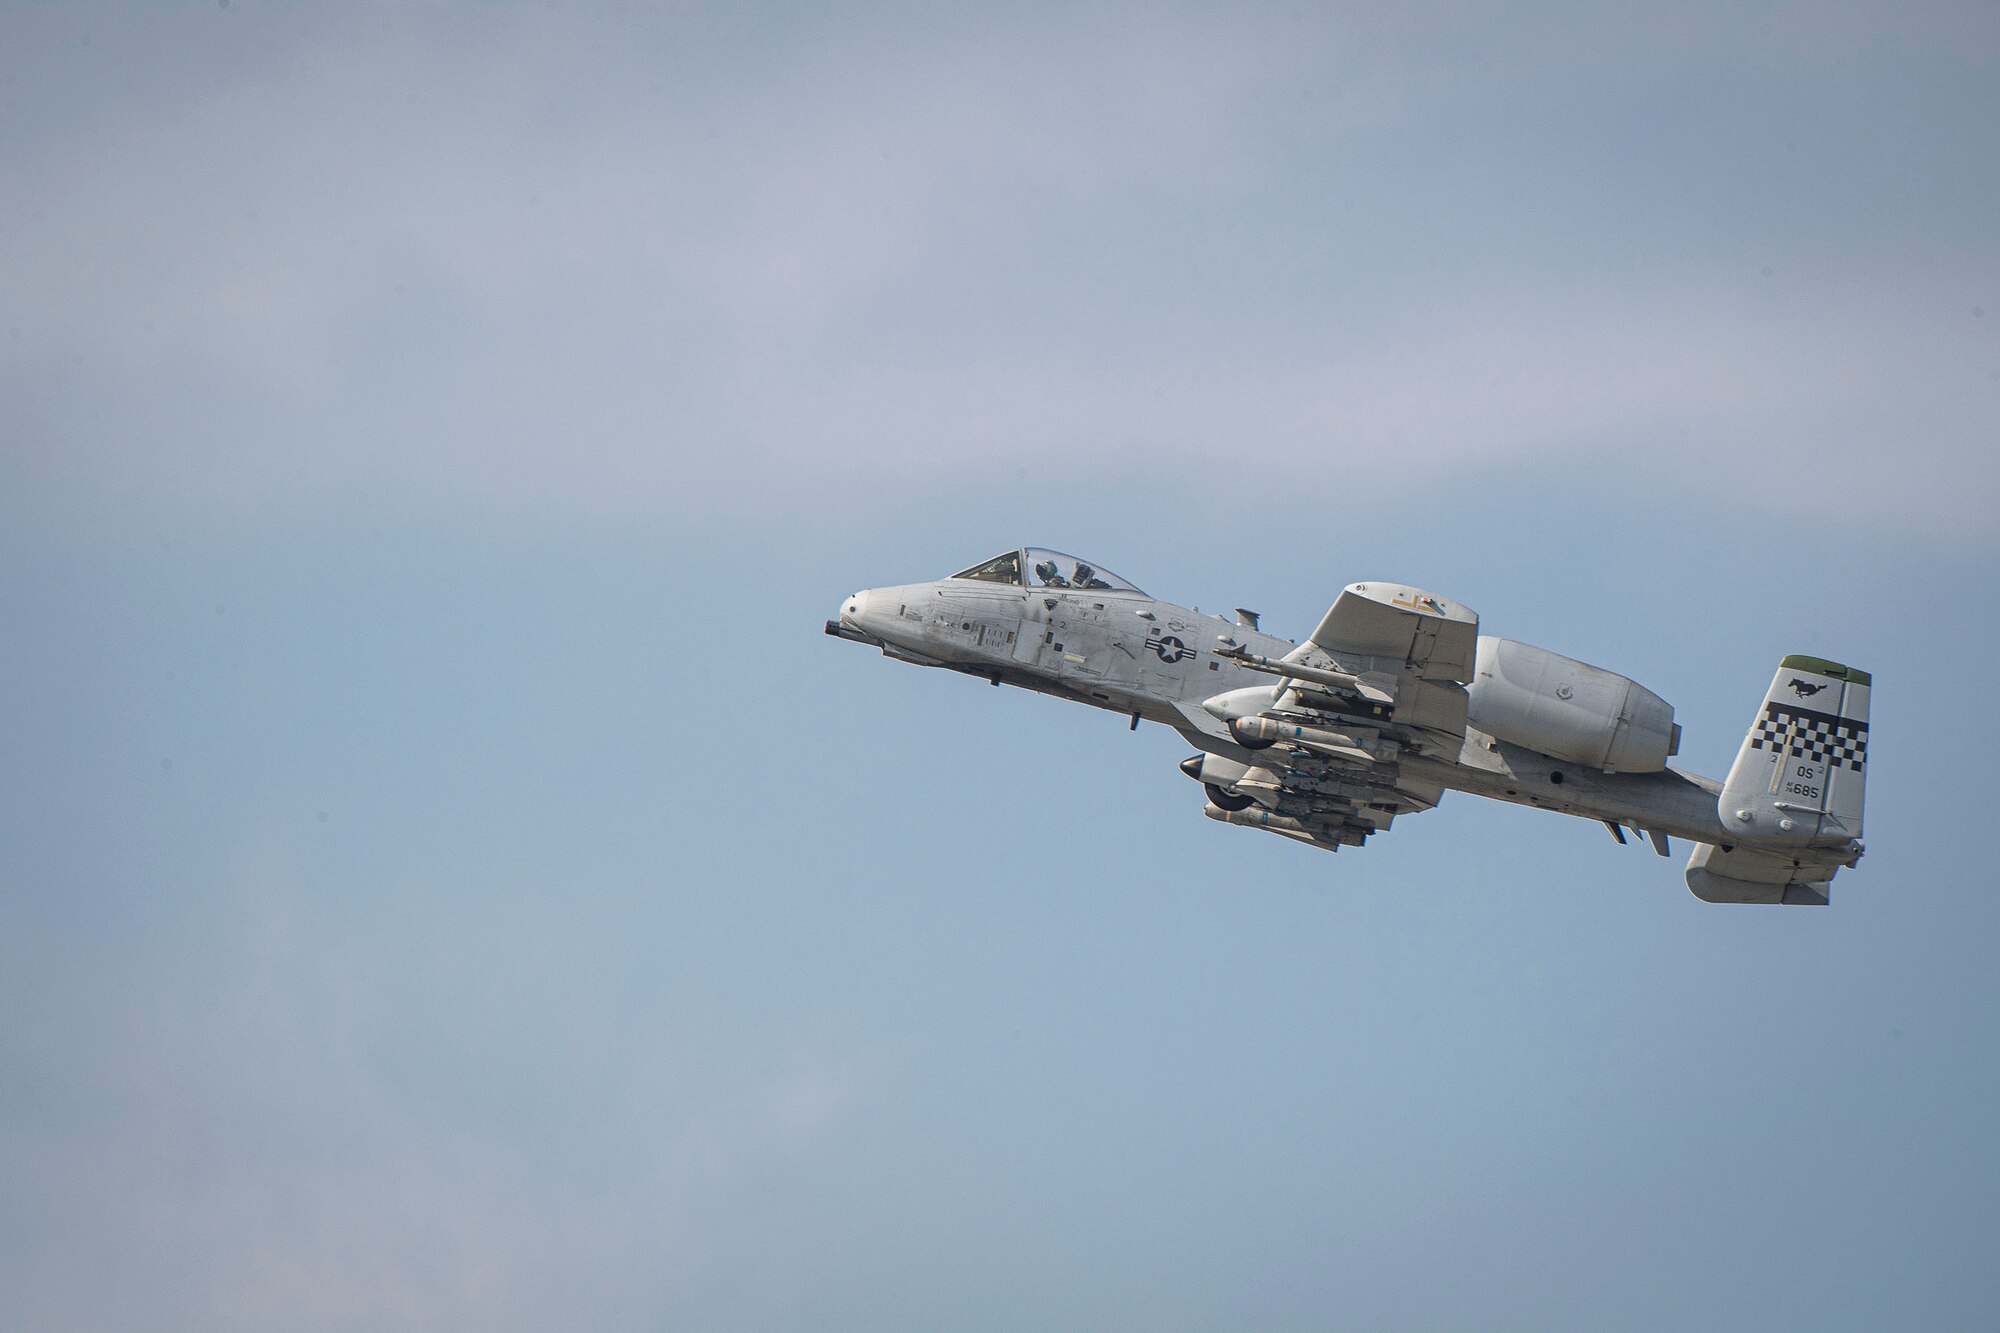 A 25th Fighter Squadron A-10C Thunderbolt II ascends the skies April 9, 2020, at Osan Air Base, Republic of Korea. Amid the COVID-19 global pandemic, the 25th FS follows the United States Forces-Korea’s health protection control measures to preserve their mission capabilities while maintaining a high state of readiness to protect the ROK. (U.S. Air Force photo by Senior Airman Darien Perez)